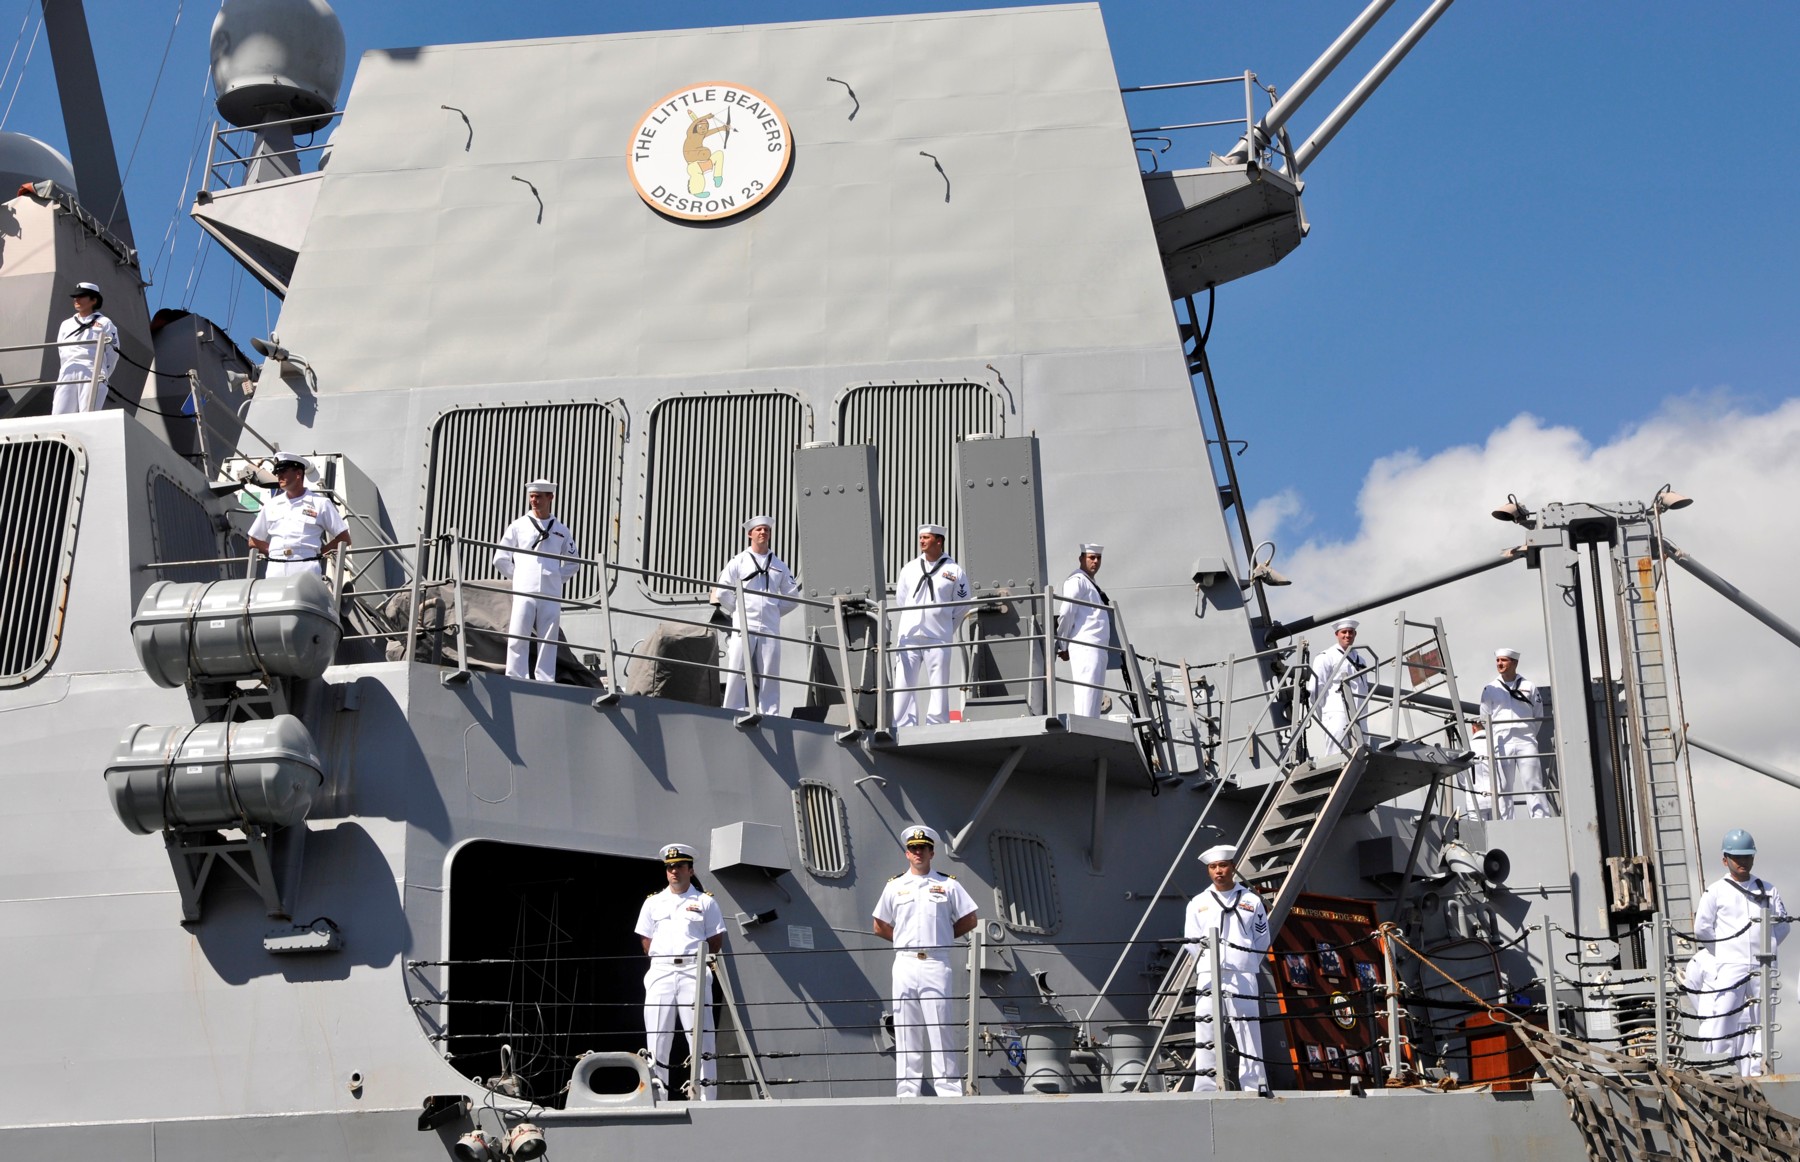 ddg-102 uss sampson guided missile destroyer 2012 19 pearl harbor hawaii